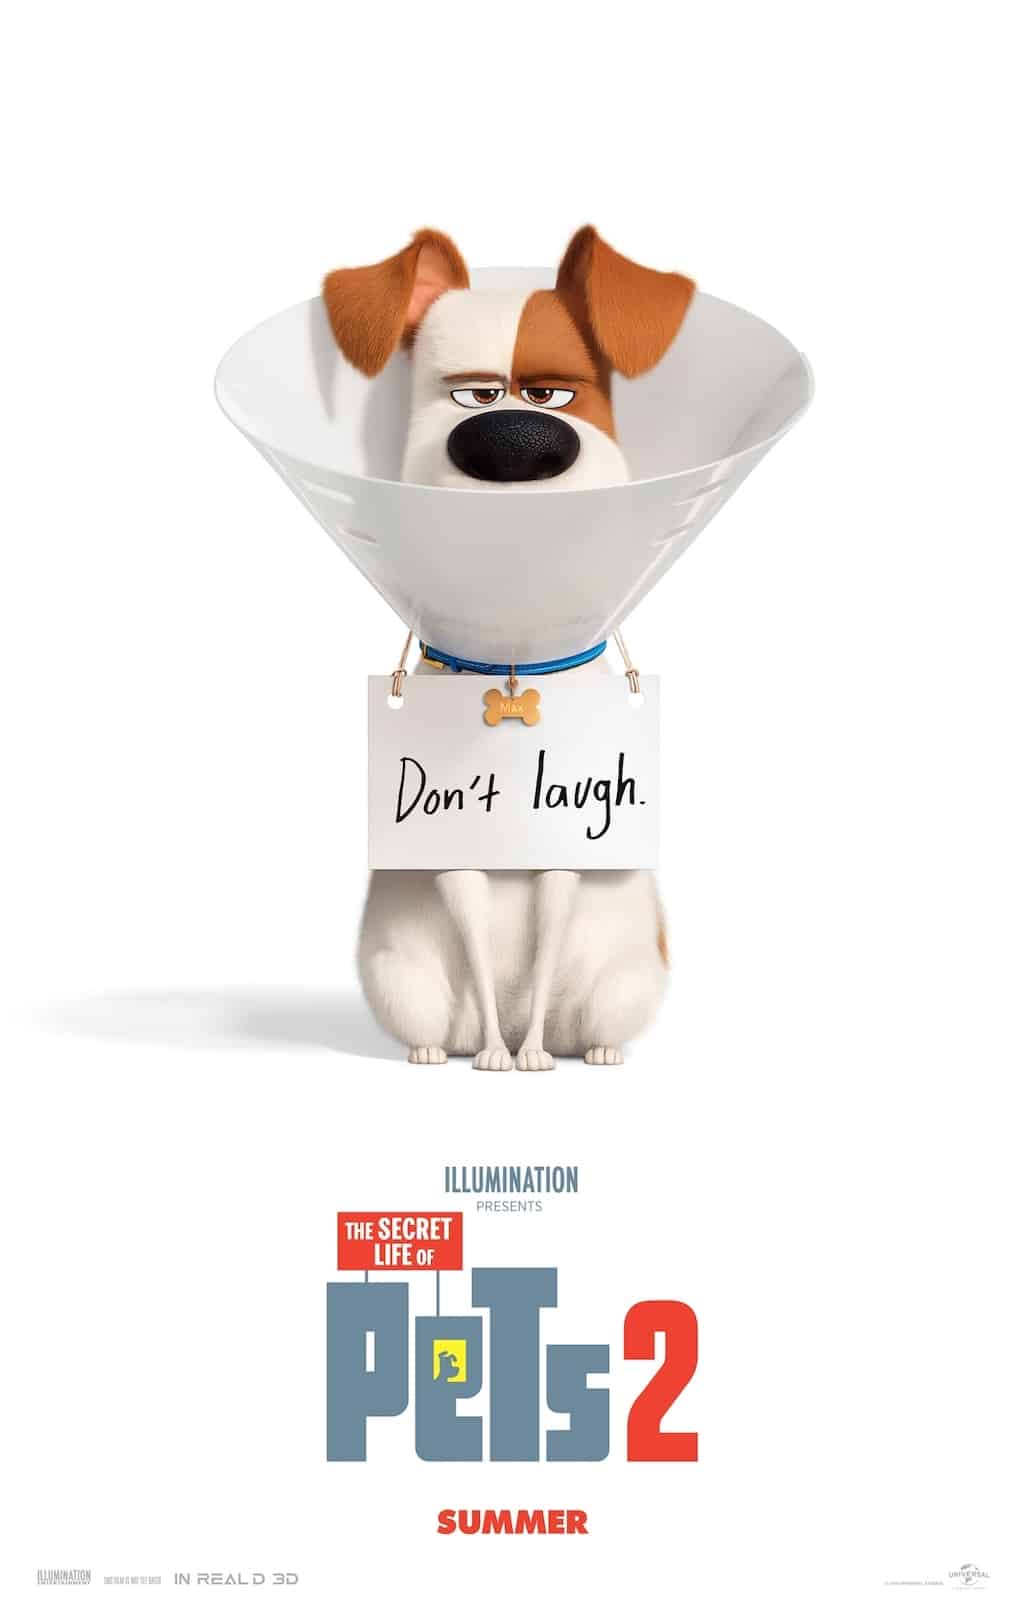 The Secret Life of Pets 2 is a sequel that fans have been waiting years for and we have an awesome giveaway prize pack to celebrate the release! 